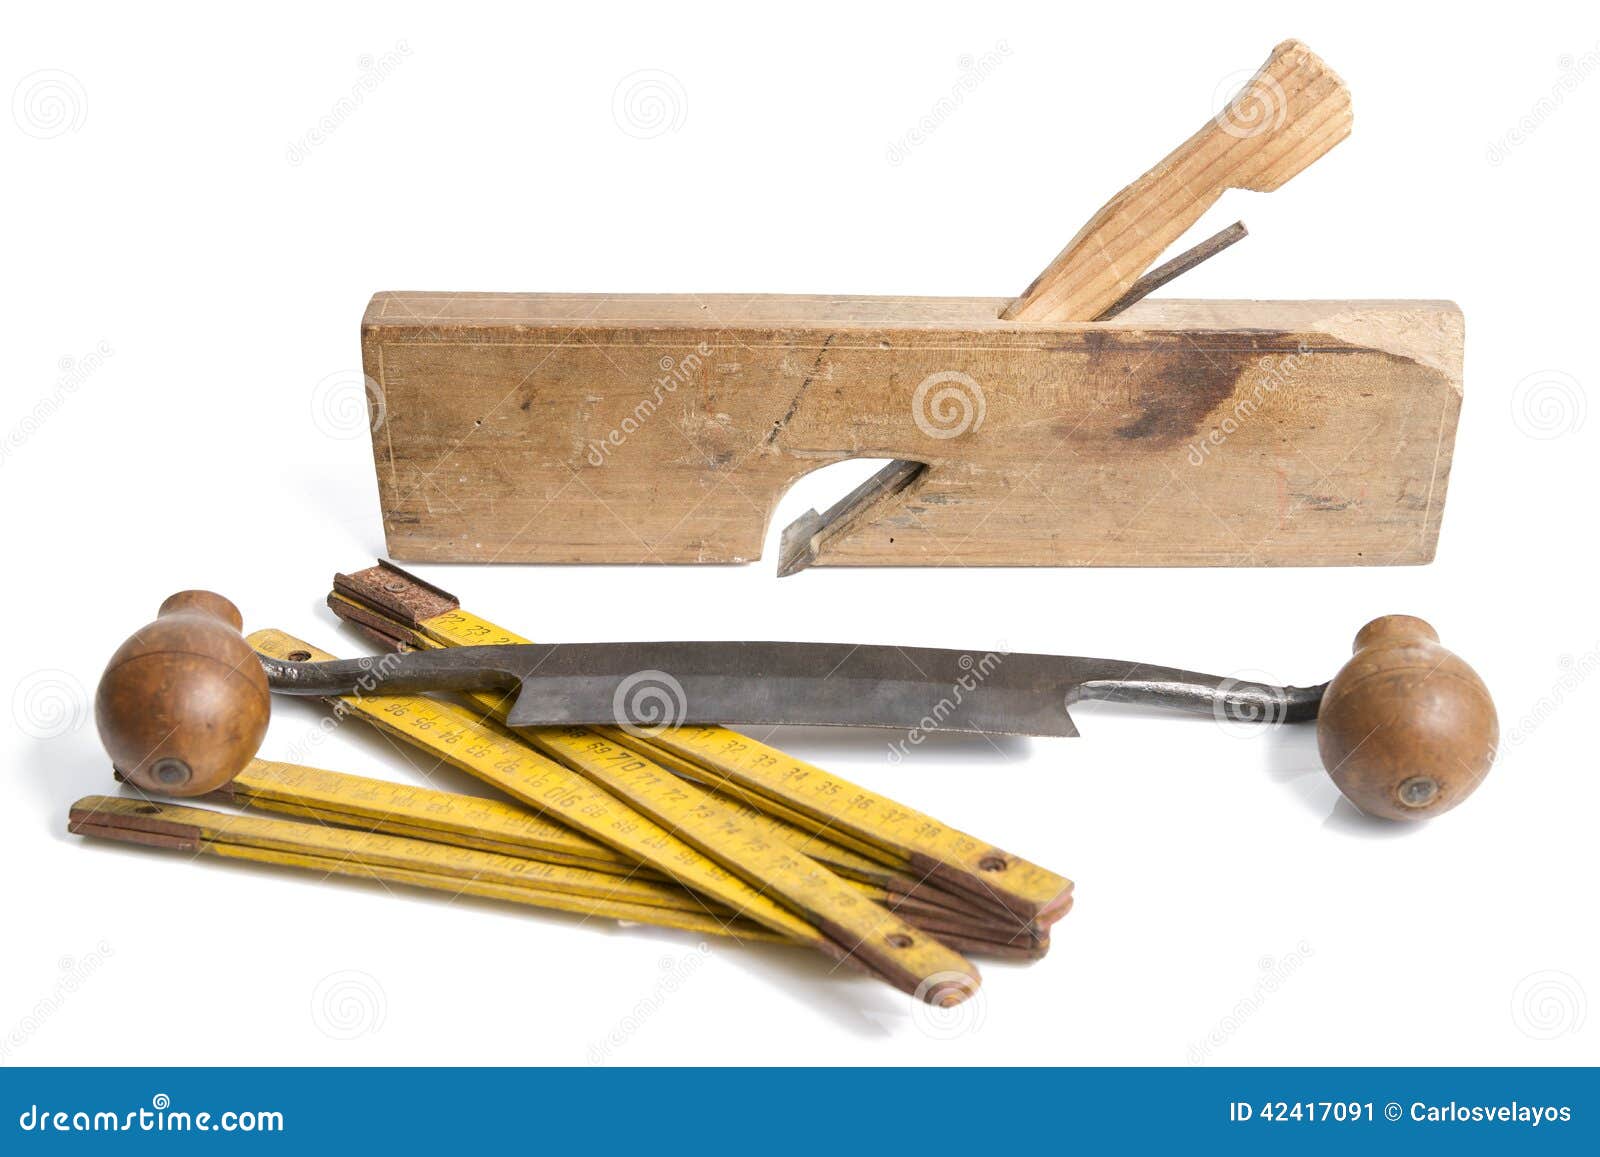 Woodworking Tools Stock Photo - Image: 42417091